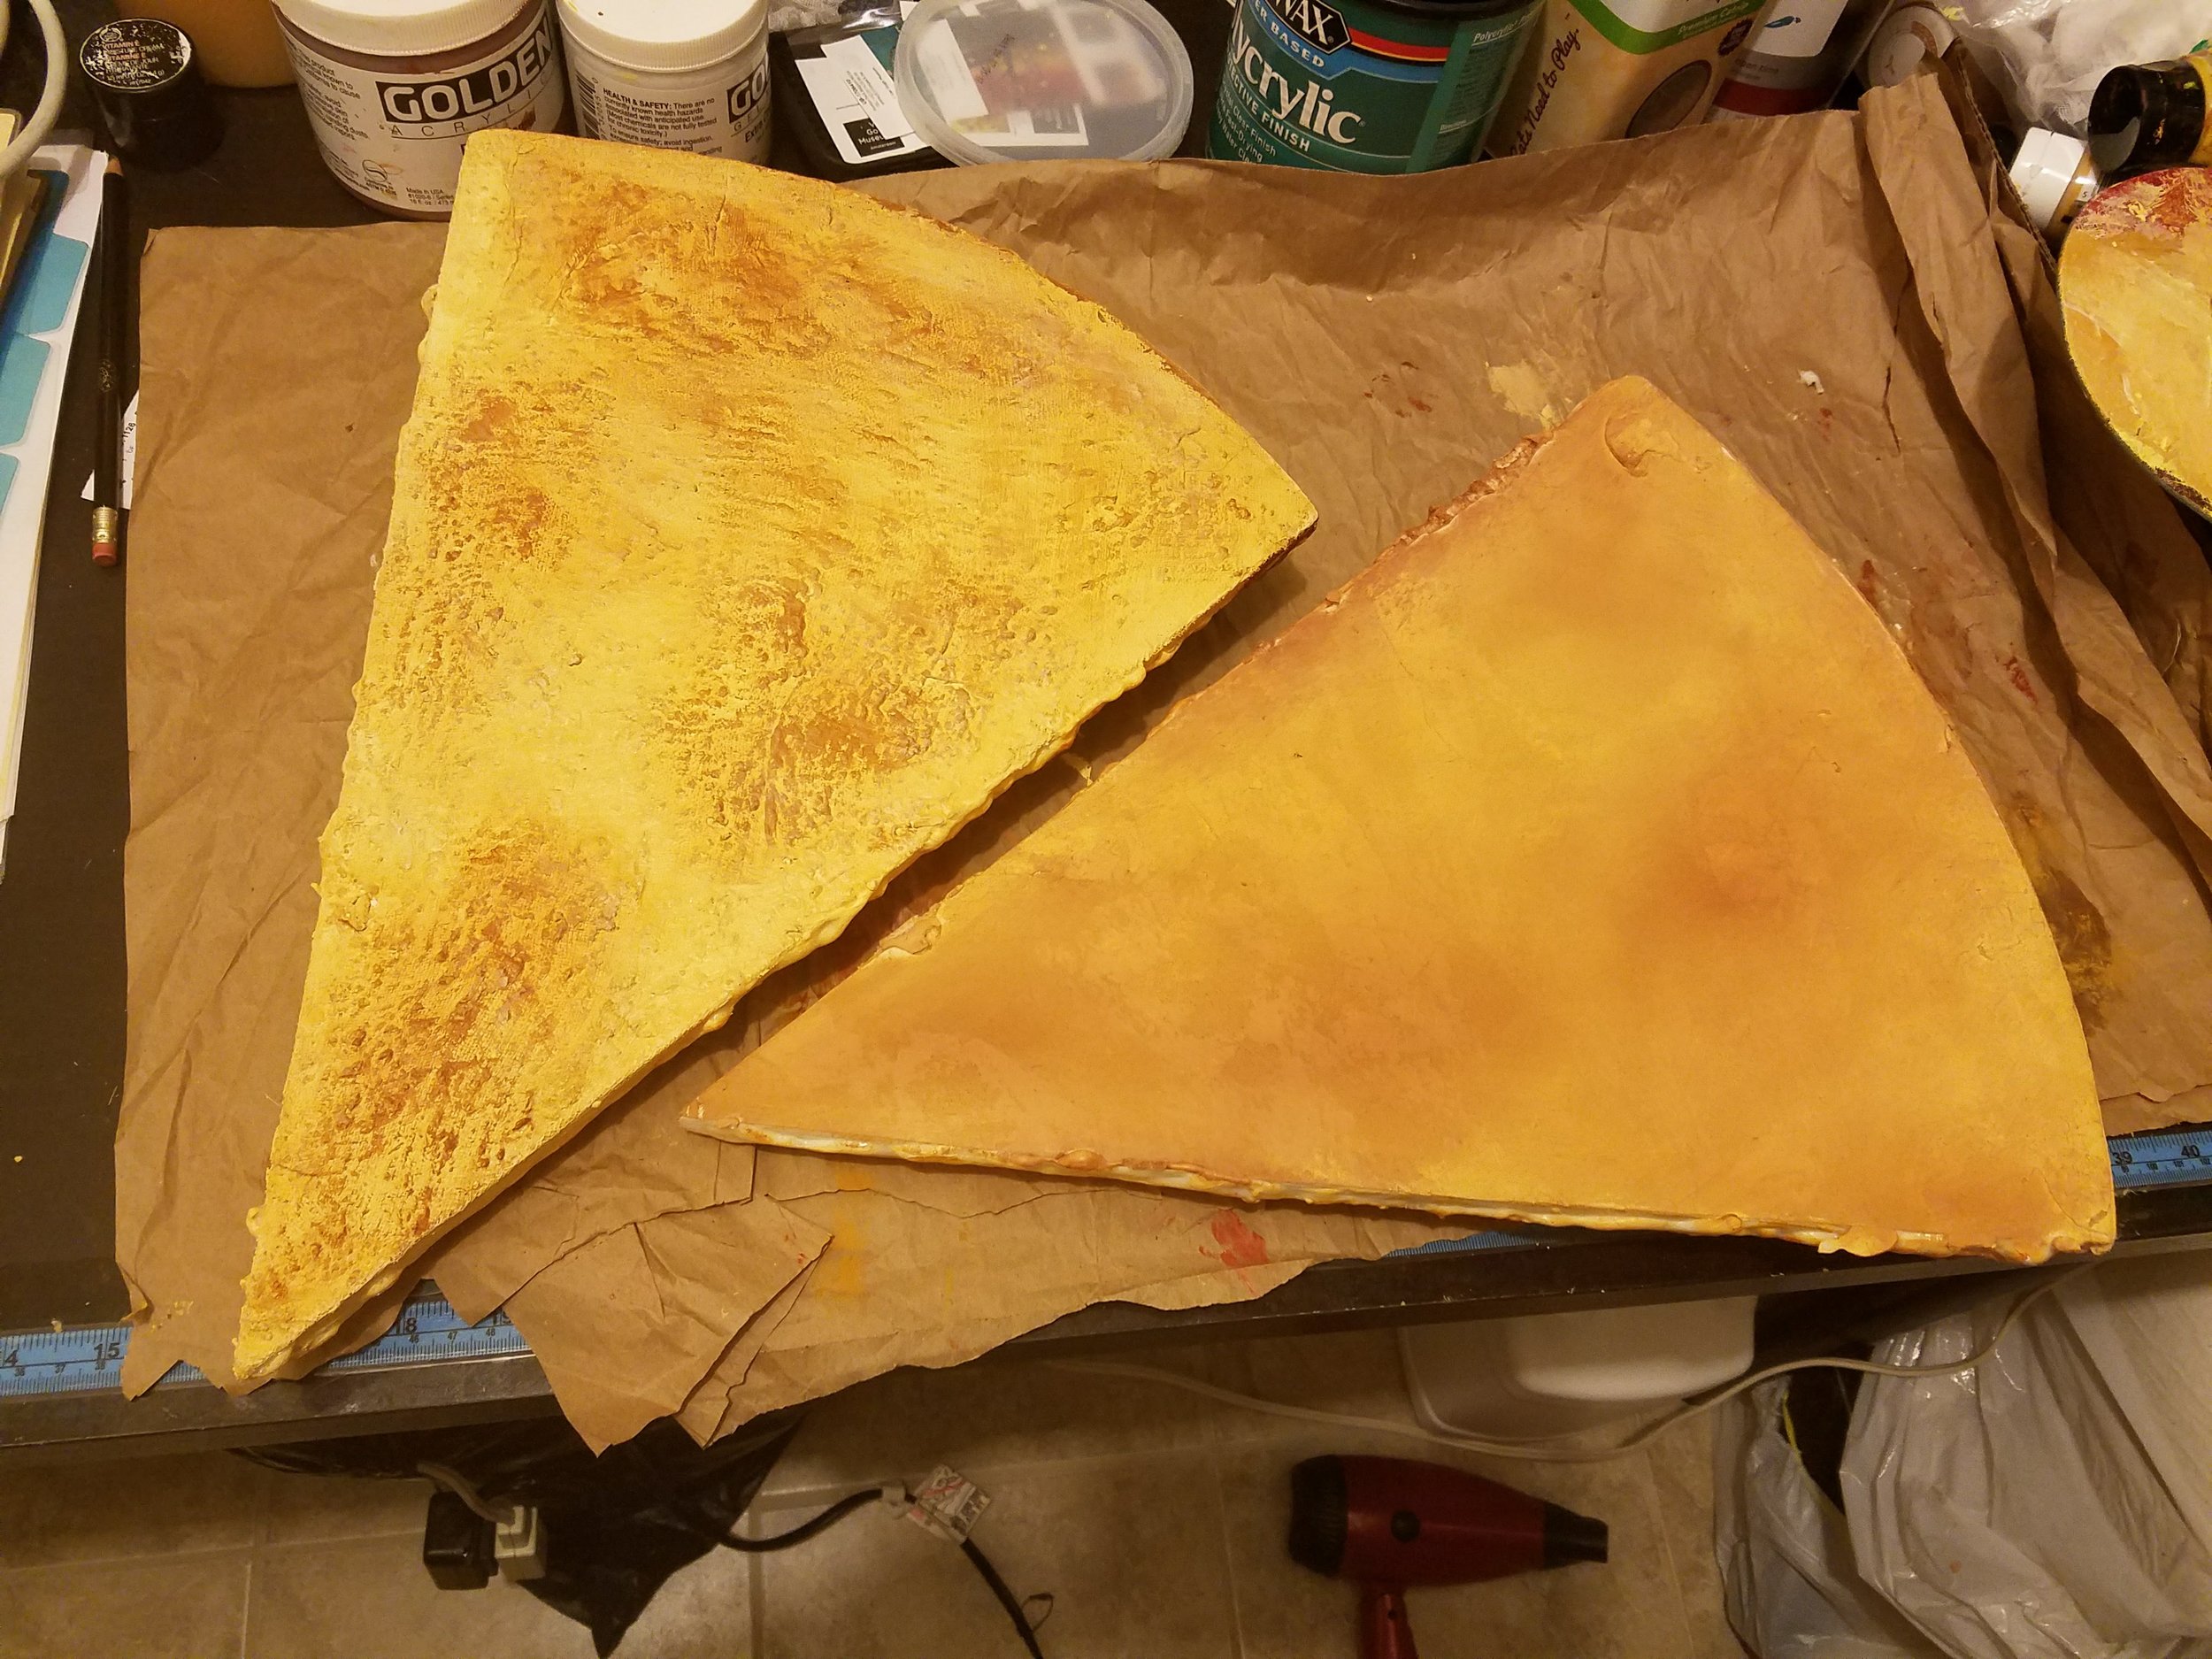  samples of the back of pizza 